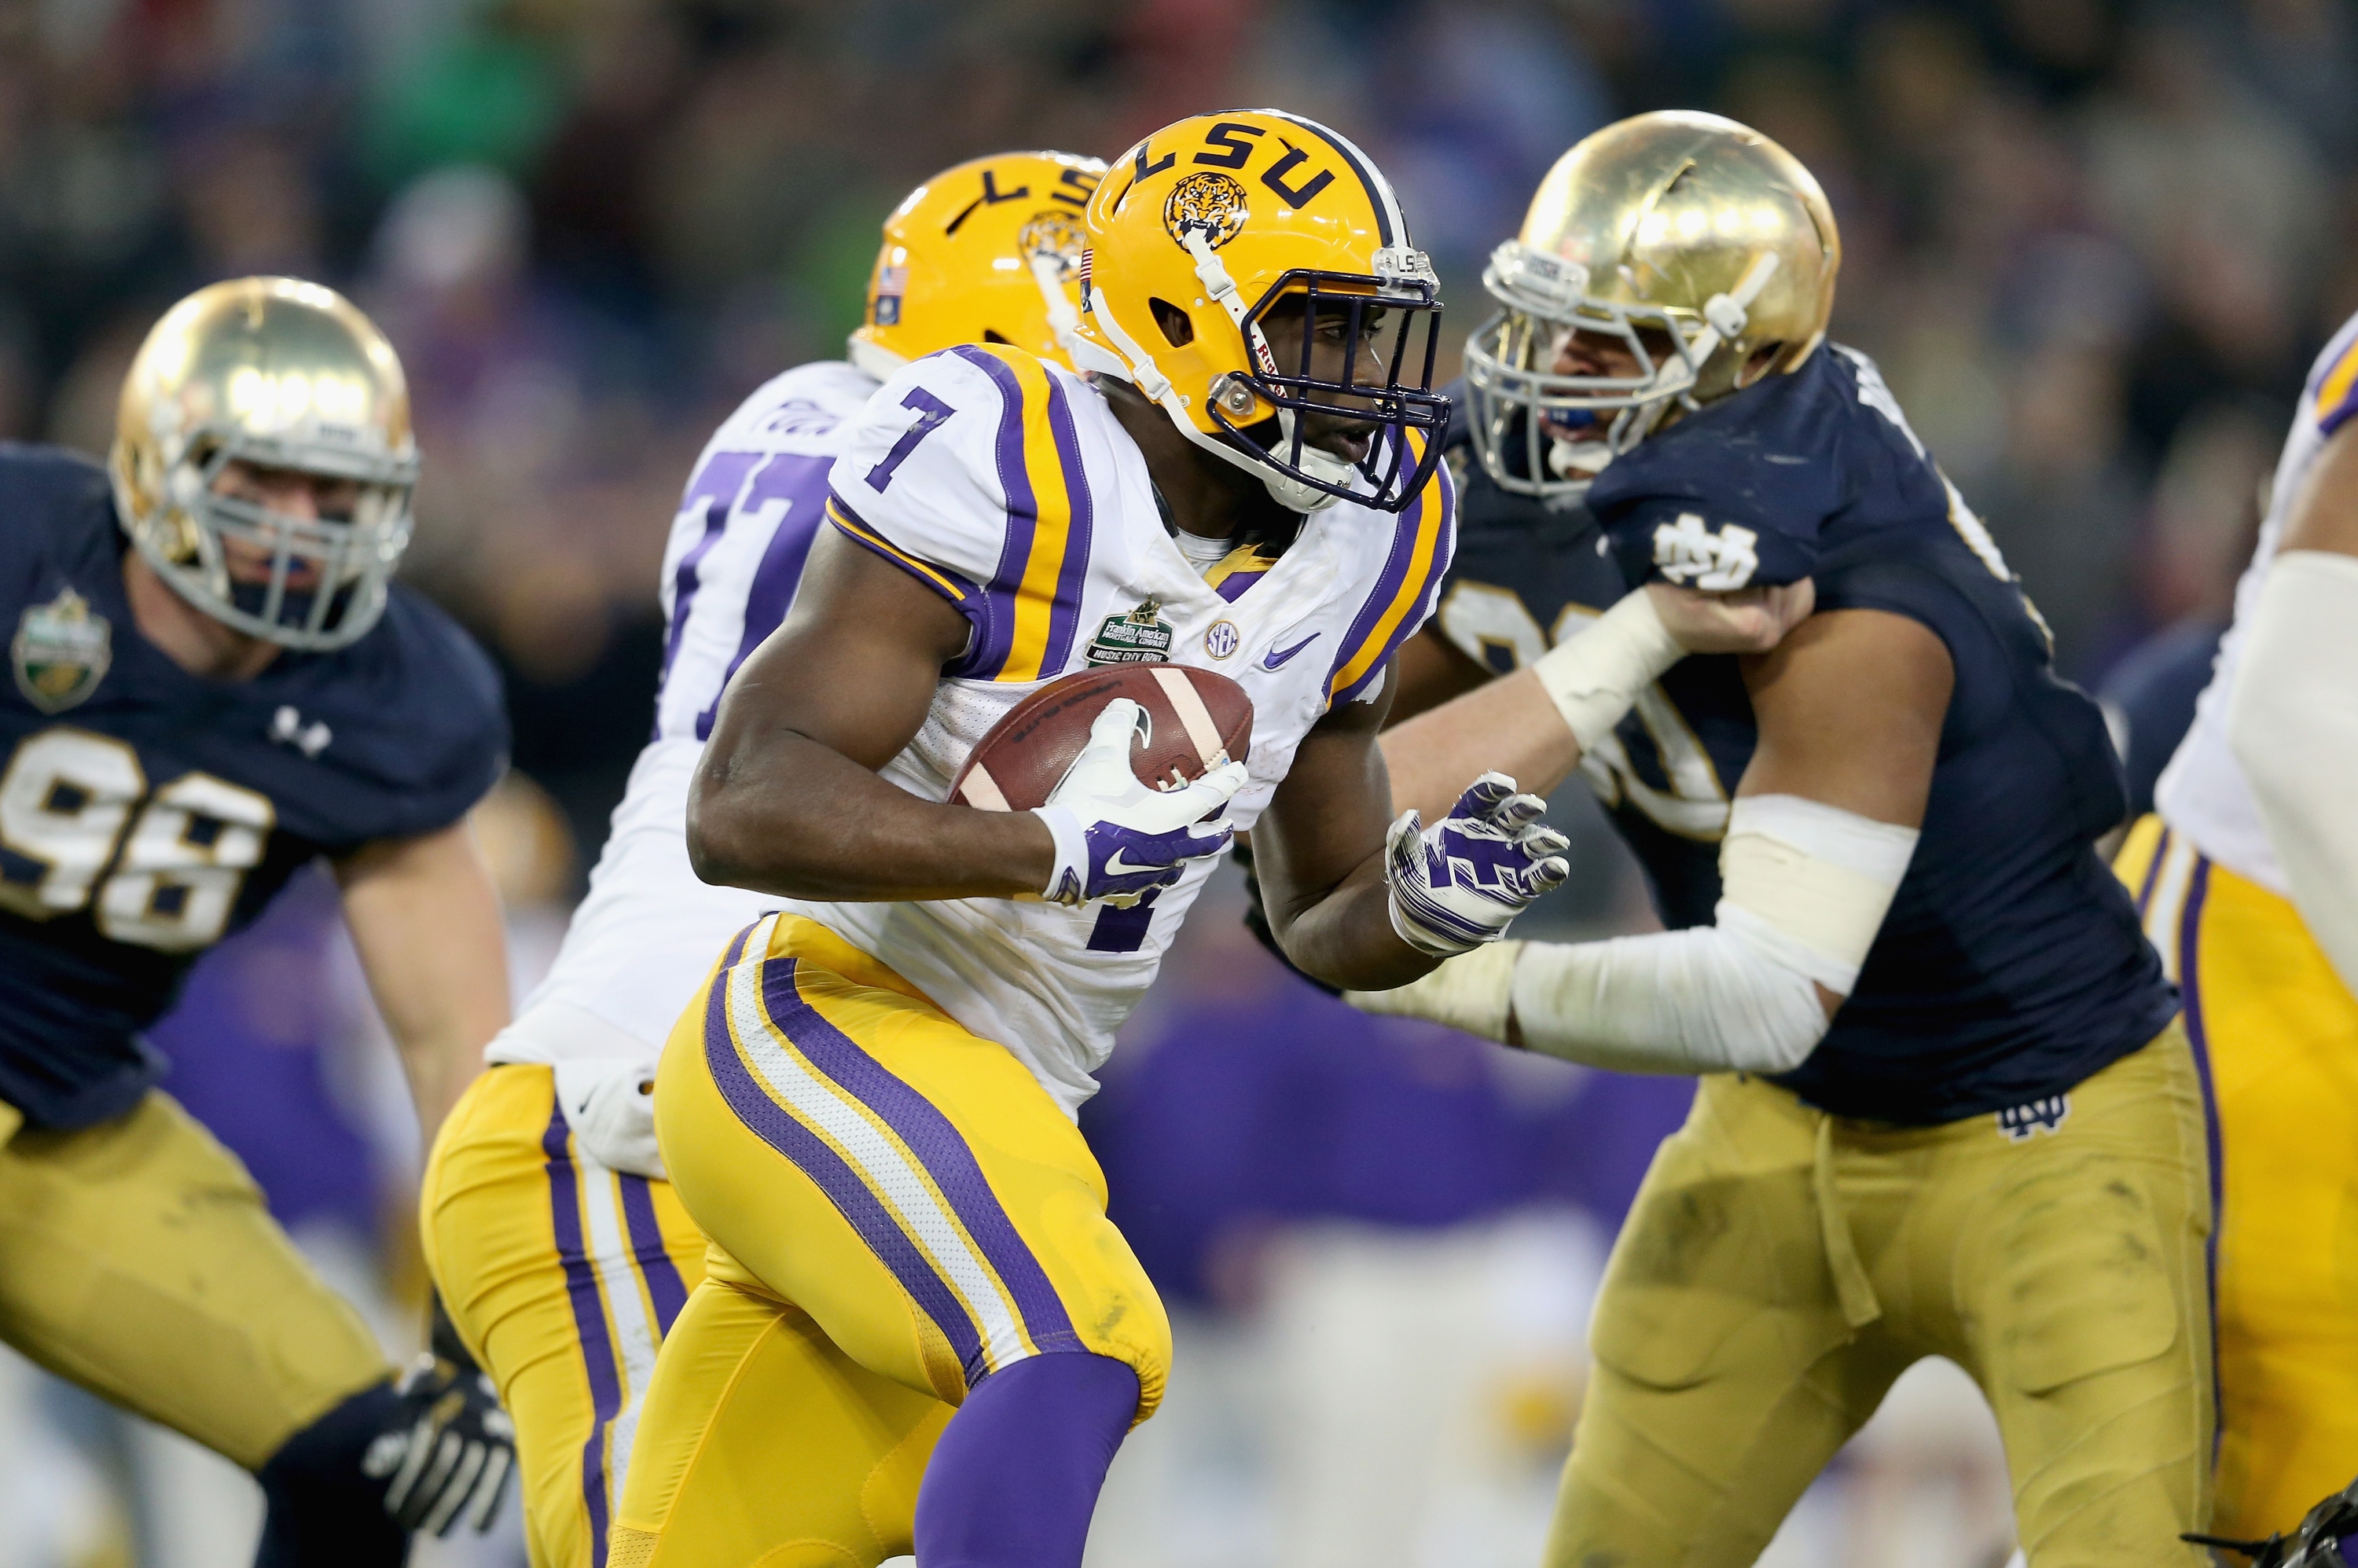 NASHVILLE, TN - DECEMBER 30:  Leonard Fournette #7 of the LSU Tigers runs with the ball against the Notre Dame Fighting Irish during the Franklin American Mortgage Music City Bowl at LP Field on December 30, 2014 in Nashville, Tennessee.  (Photo by Andy Lyons/Getty Images)